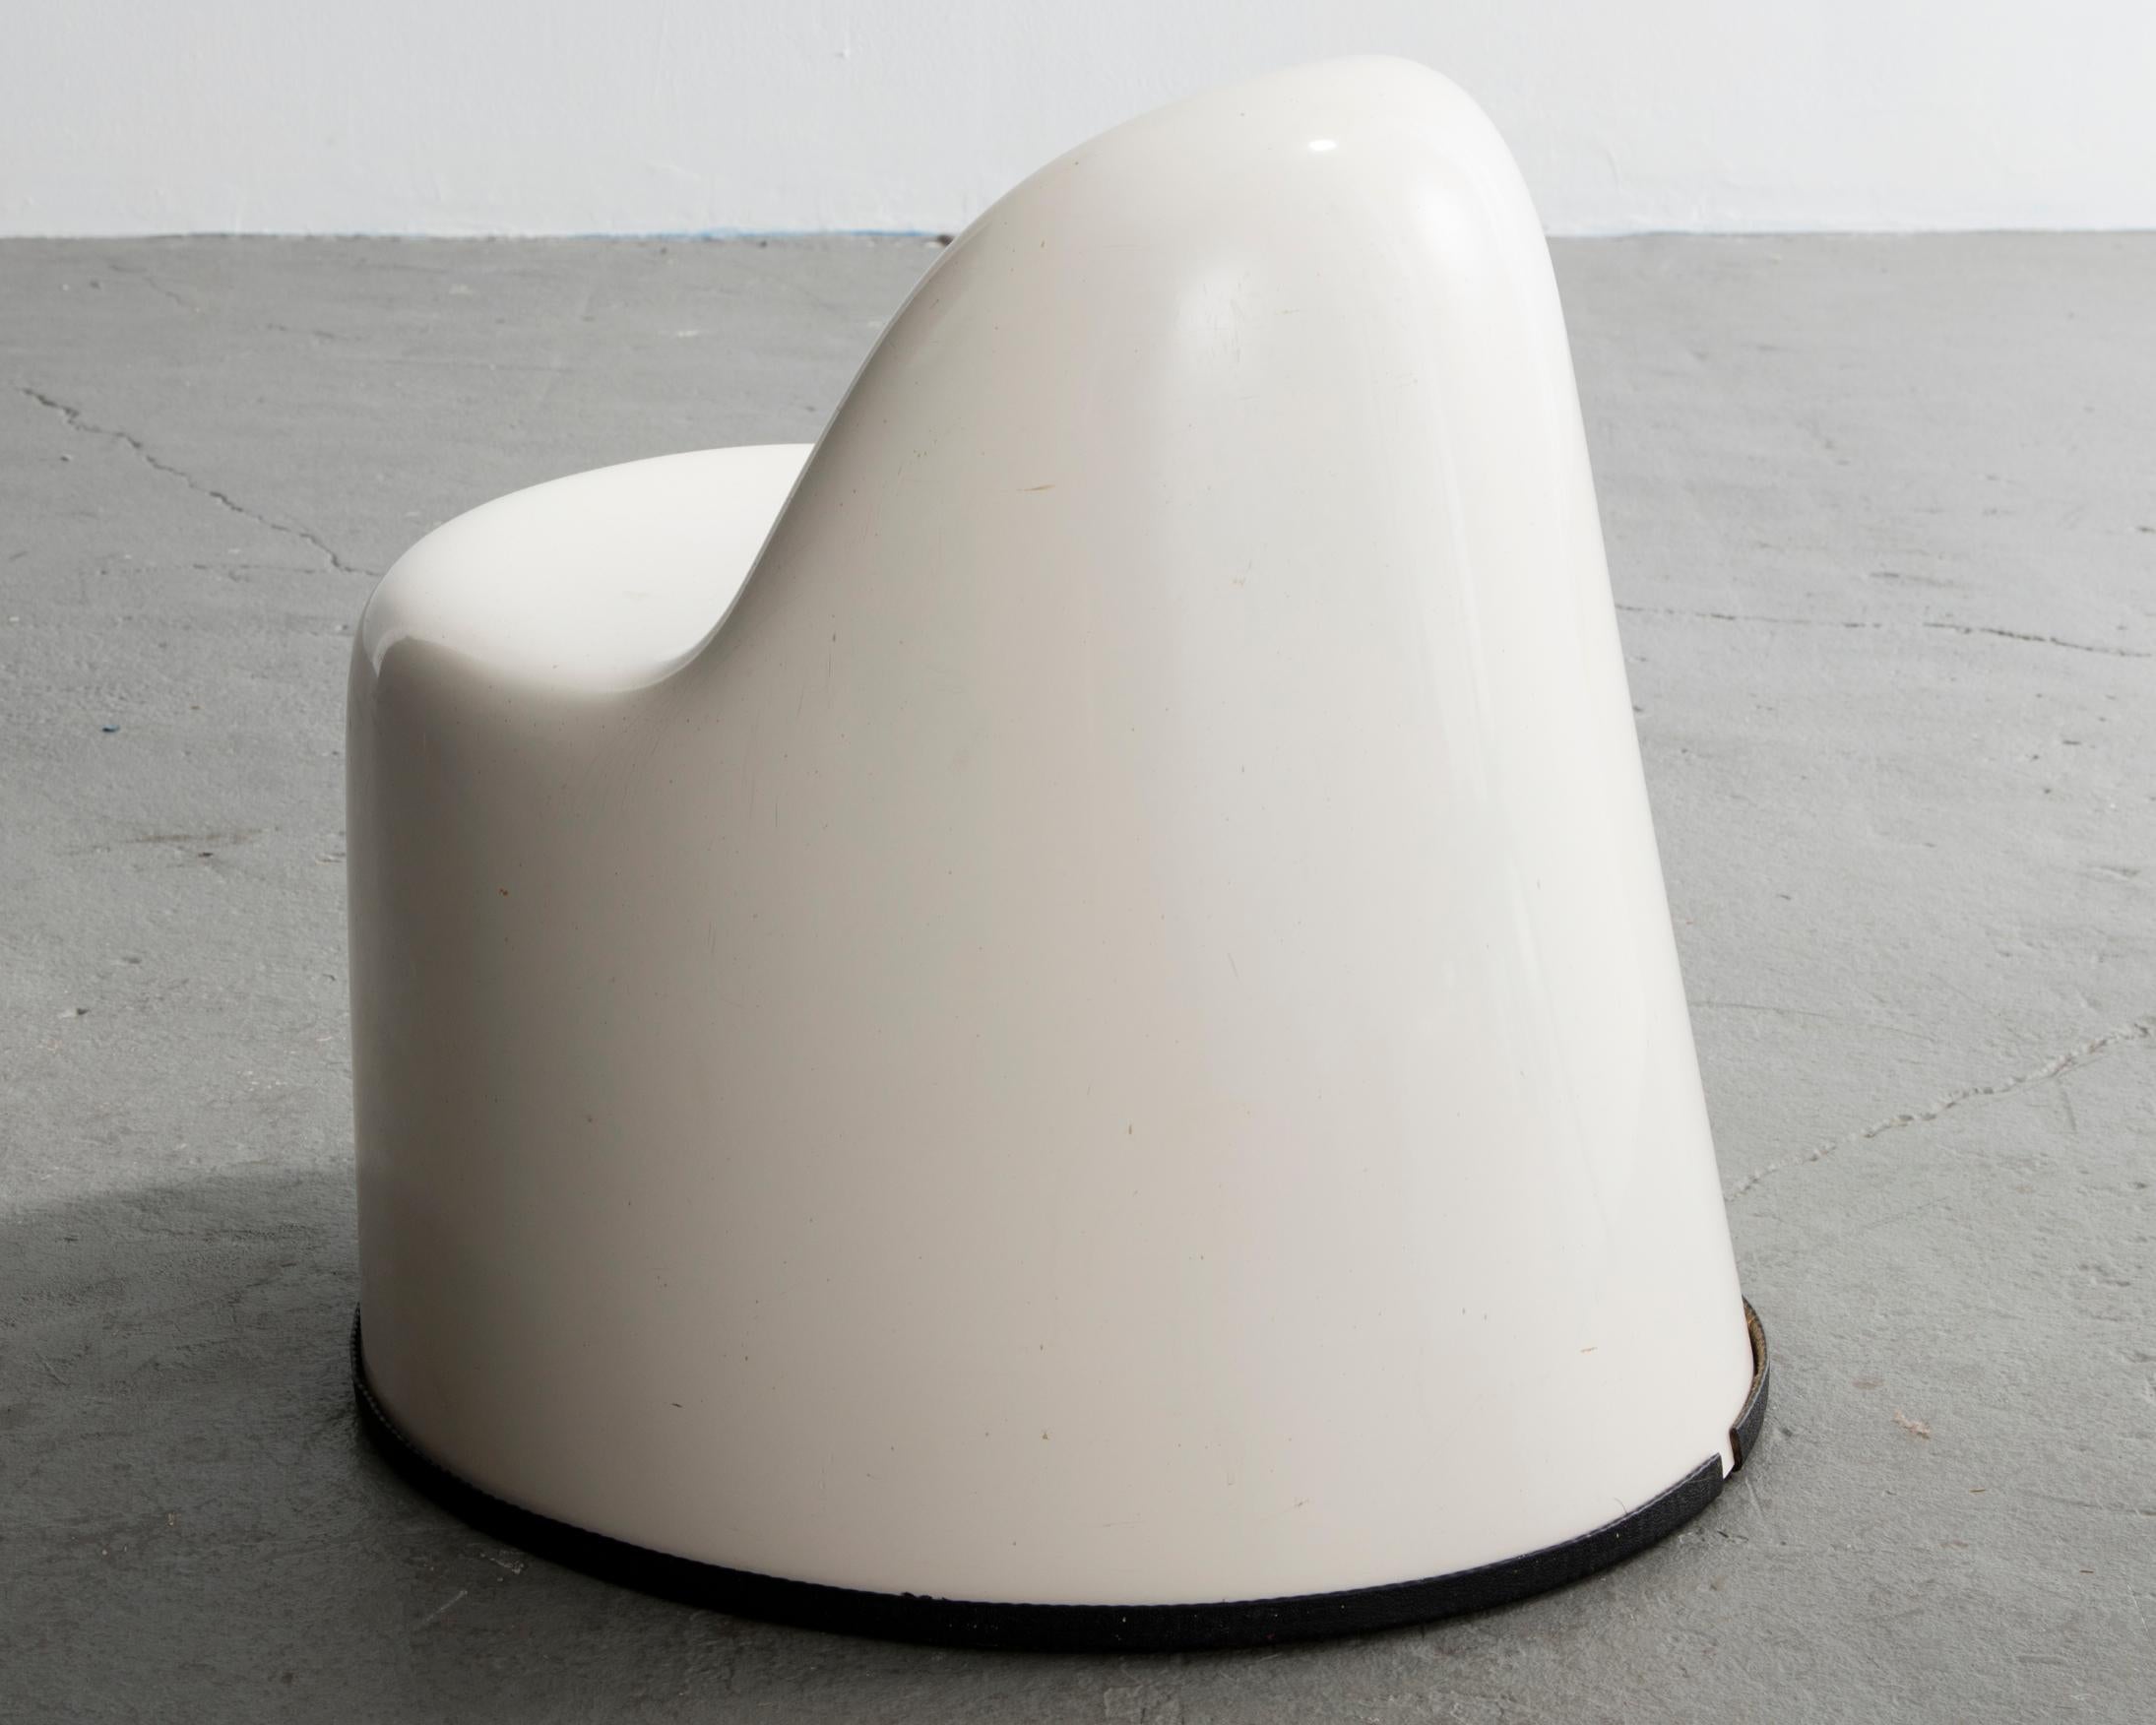 Baby Molar chair in gel-coated, fiberglass-reinforced plastic. Designed and made by Wendell Castle, Rochester, New York, 1971. Signed and dated 